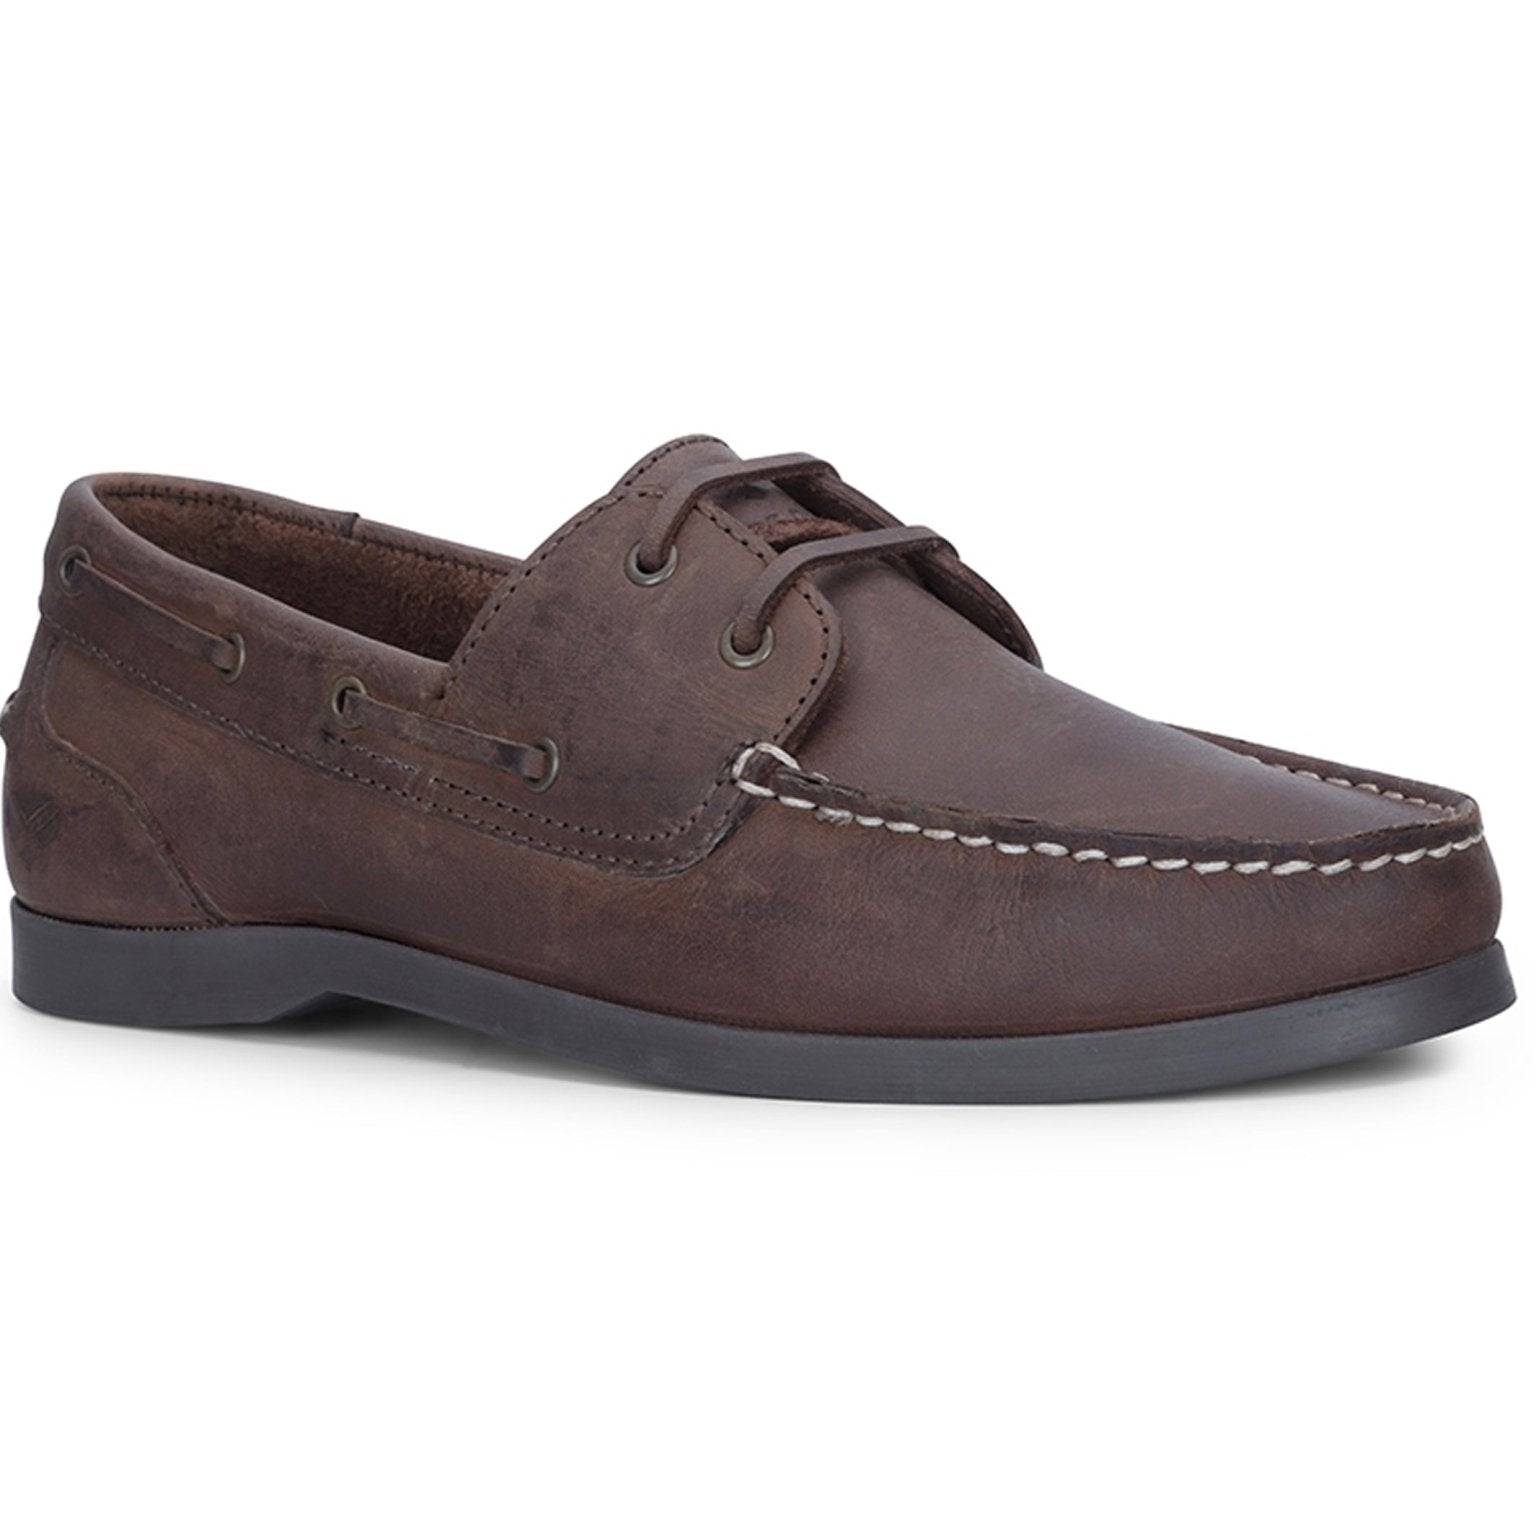 Hoggs of Fife Hoggs of Fife - Boat Shoe / Deck shoe With Sipe sole hand stitched leather shoe - Mull deck shoe Shoes